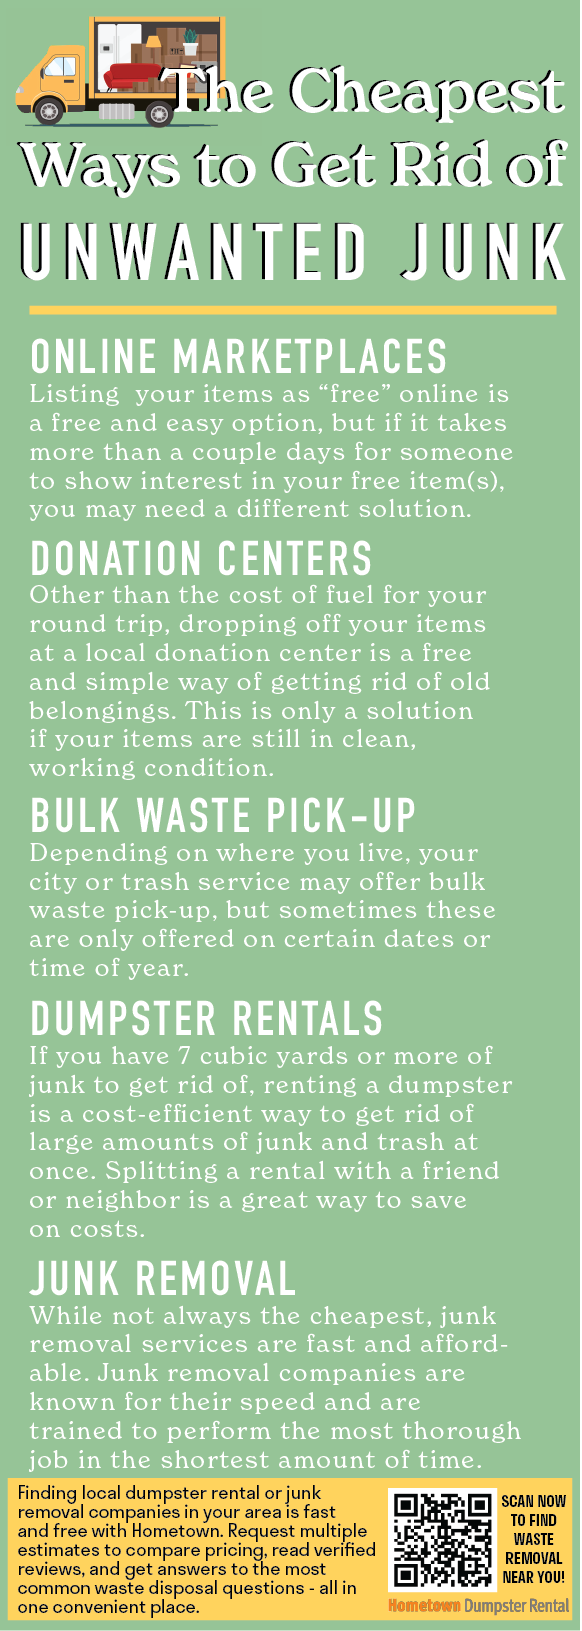 The Cheapest Ways to Get Rid of Unwanted Junk Infographic